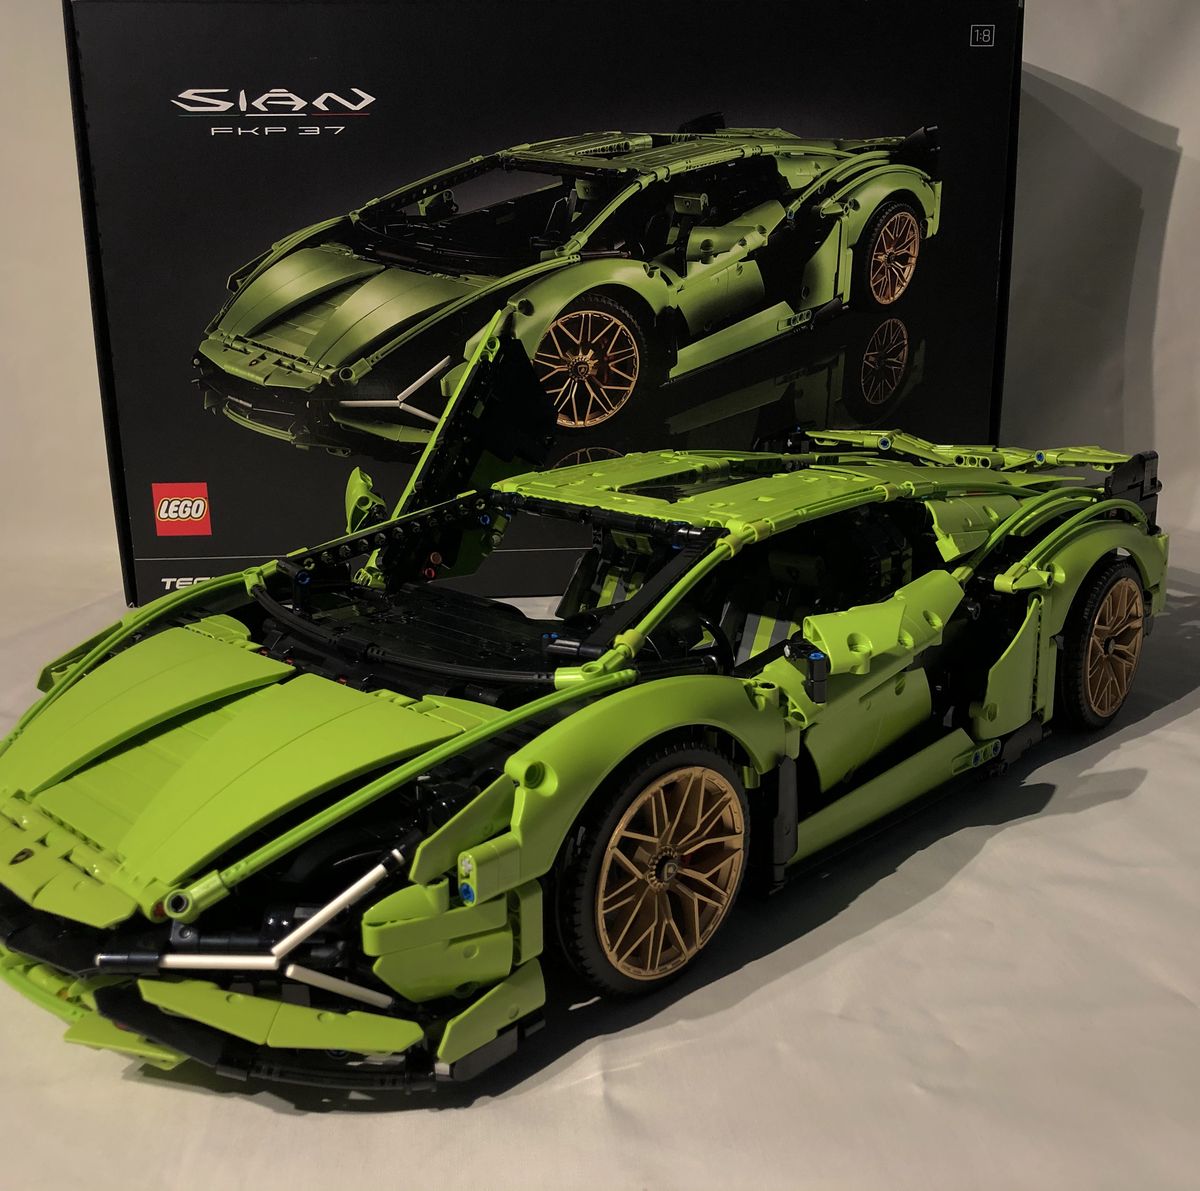 The Lego Version of the Limited Edition Lamborghini Sian Comes with a Weekend Bag